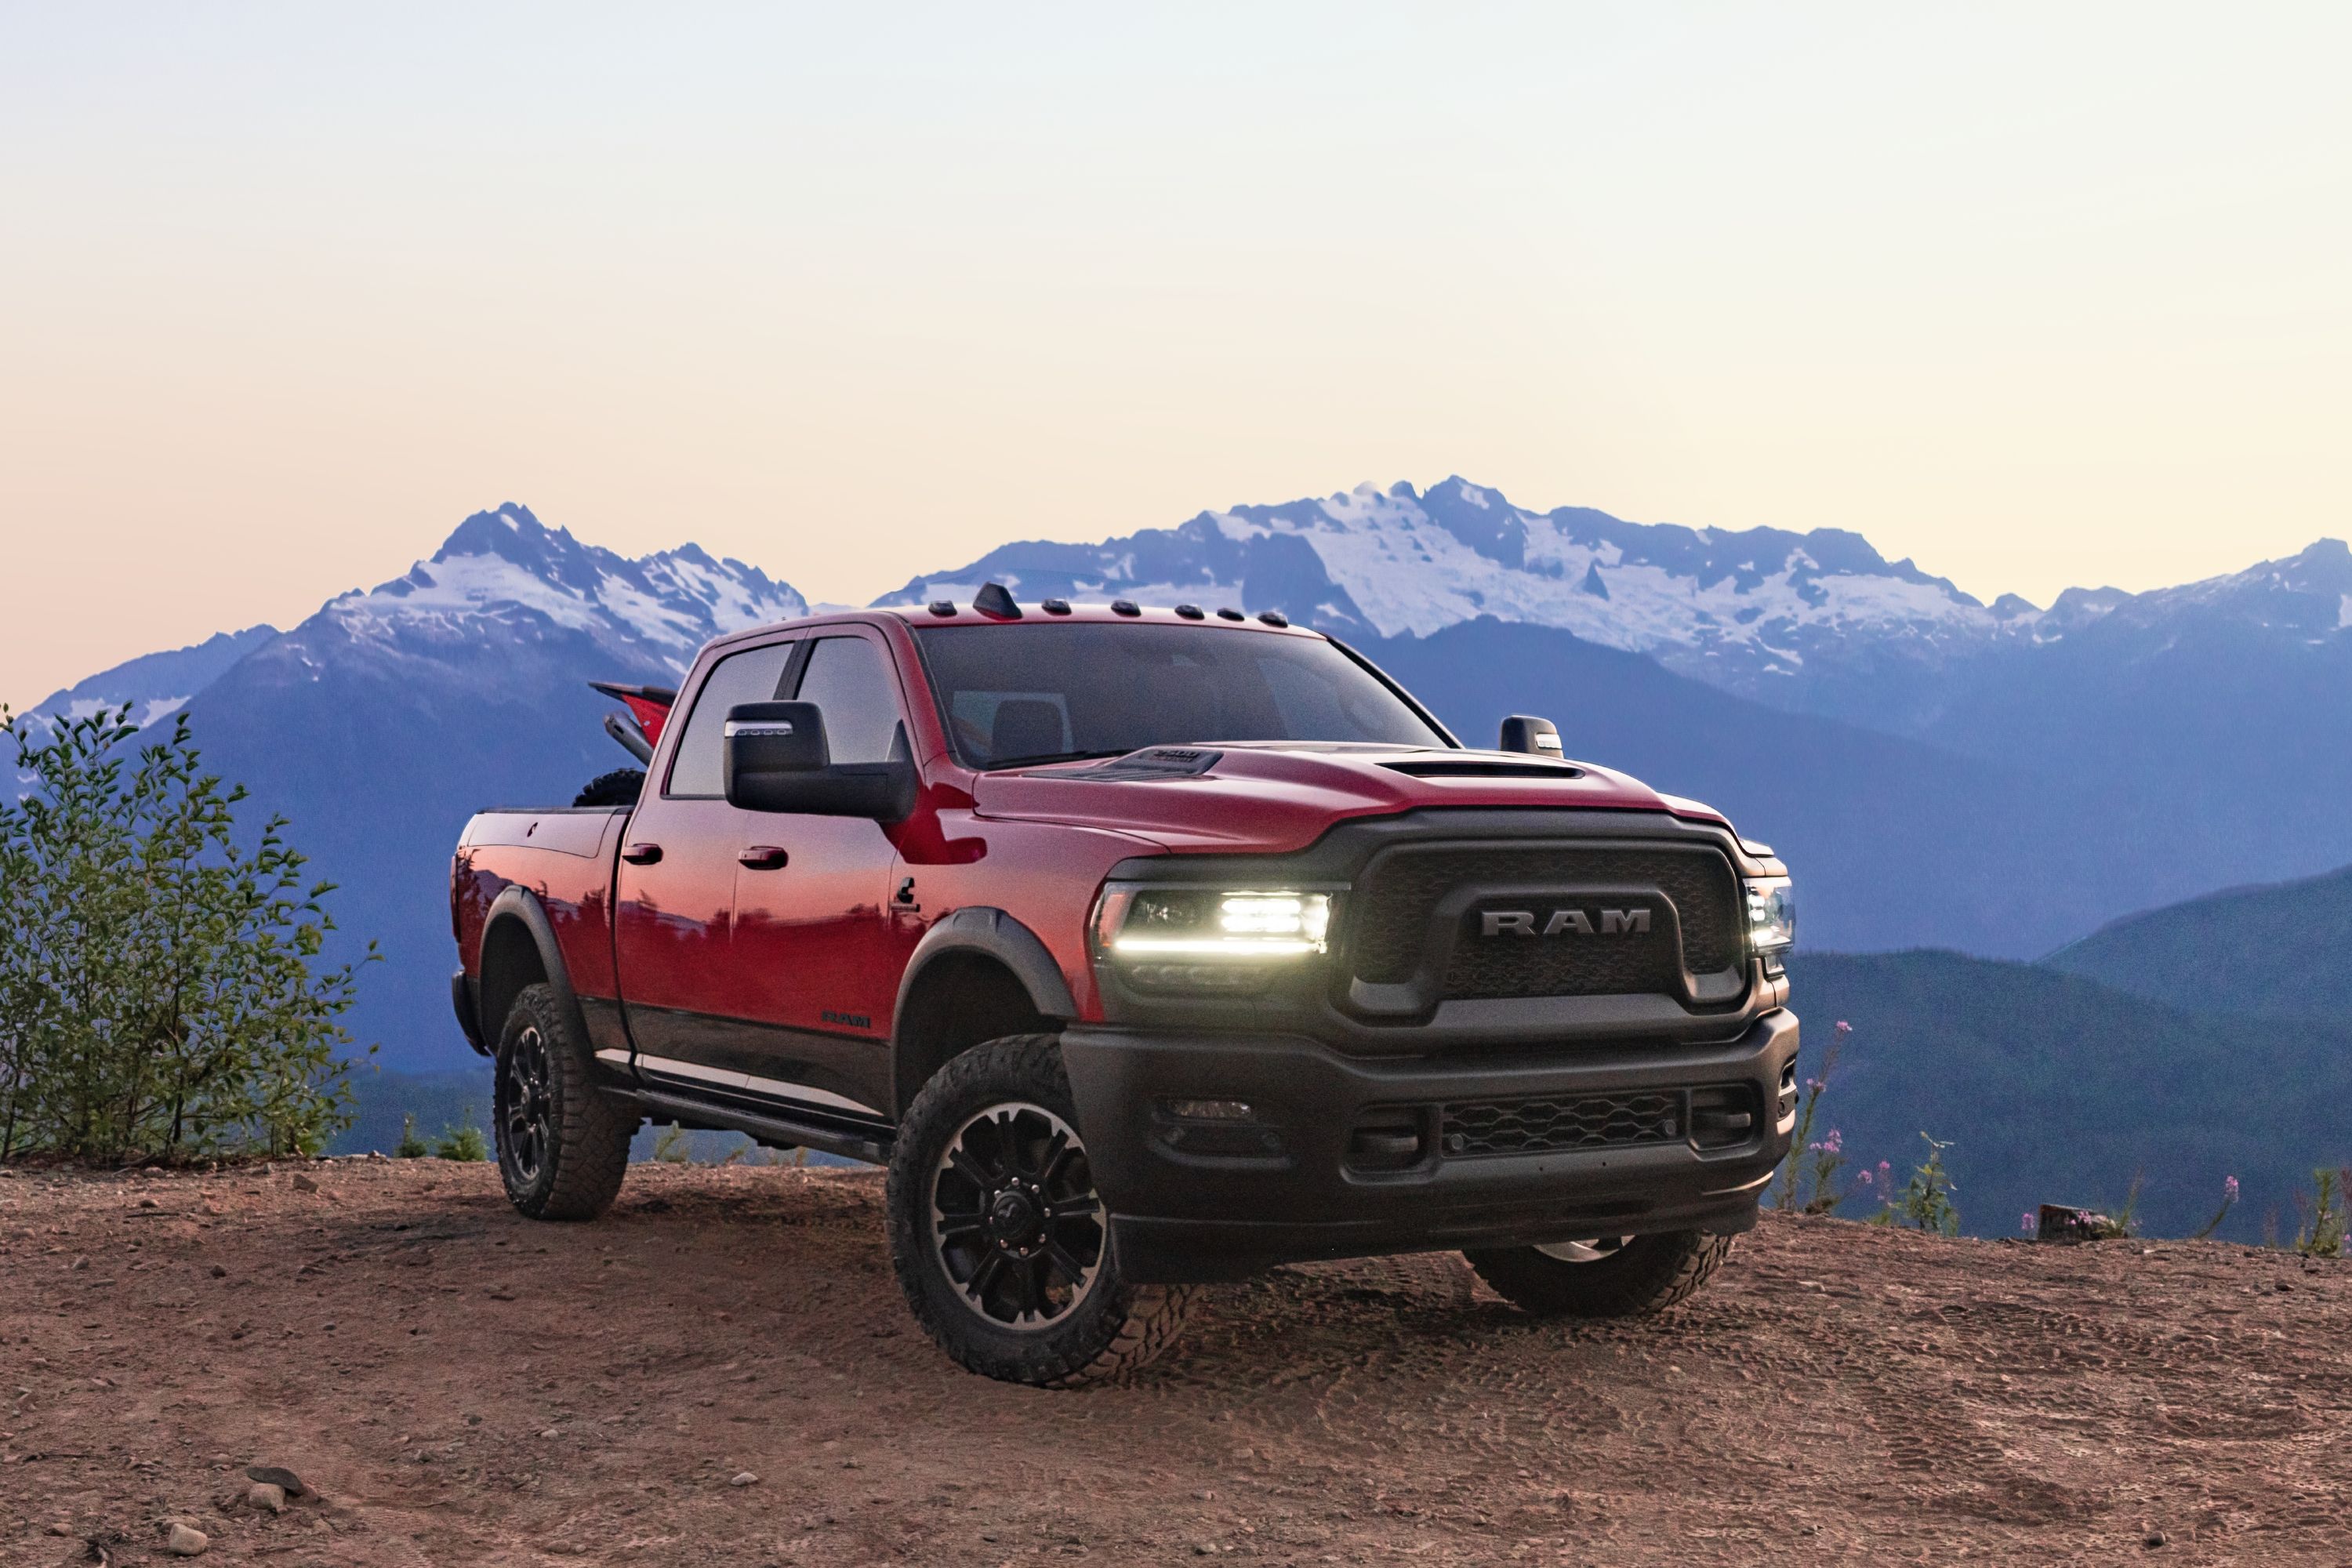 2025 Ram 1500 Ramcharger Hybrid: What We Know So Far